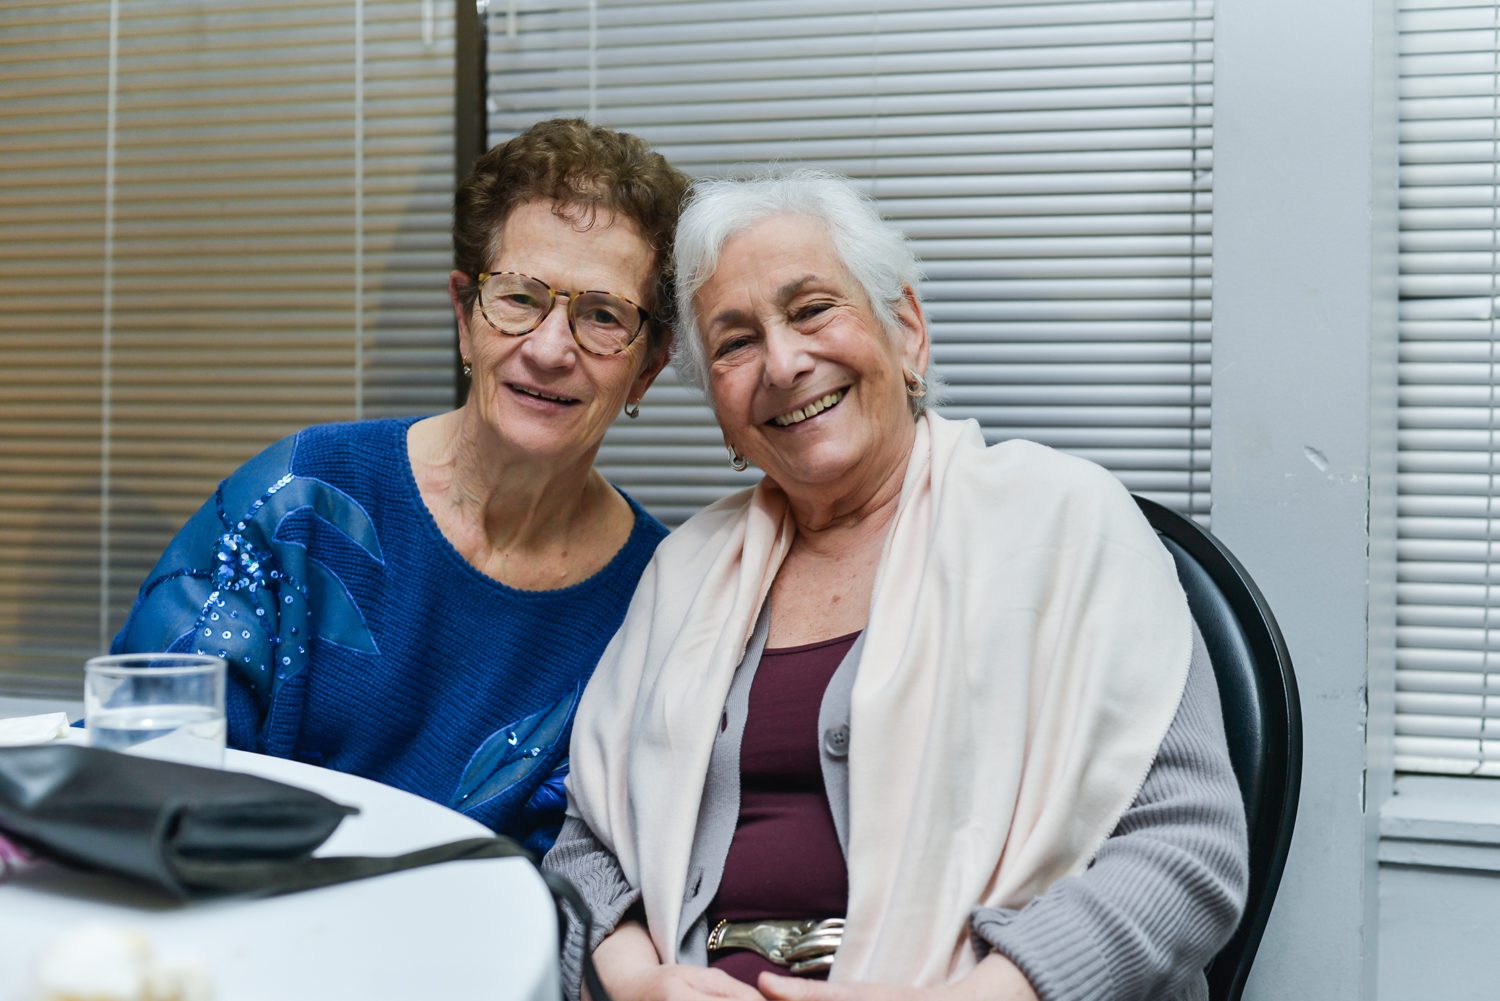 Two women sitting at a table smiling for the camera.